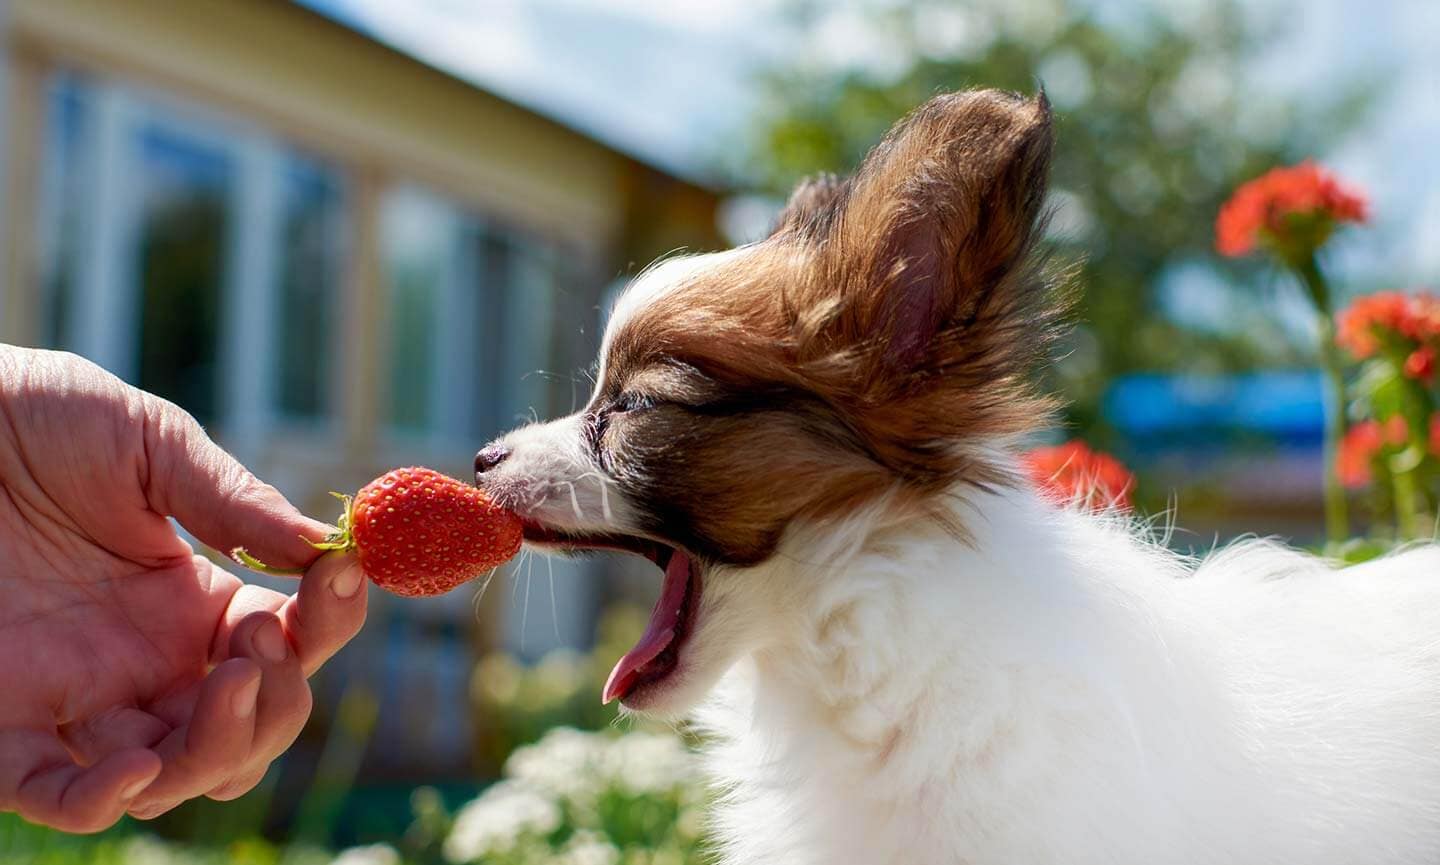 can dogs eat strawberry jelly?